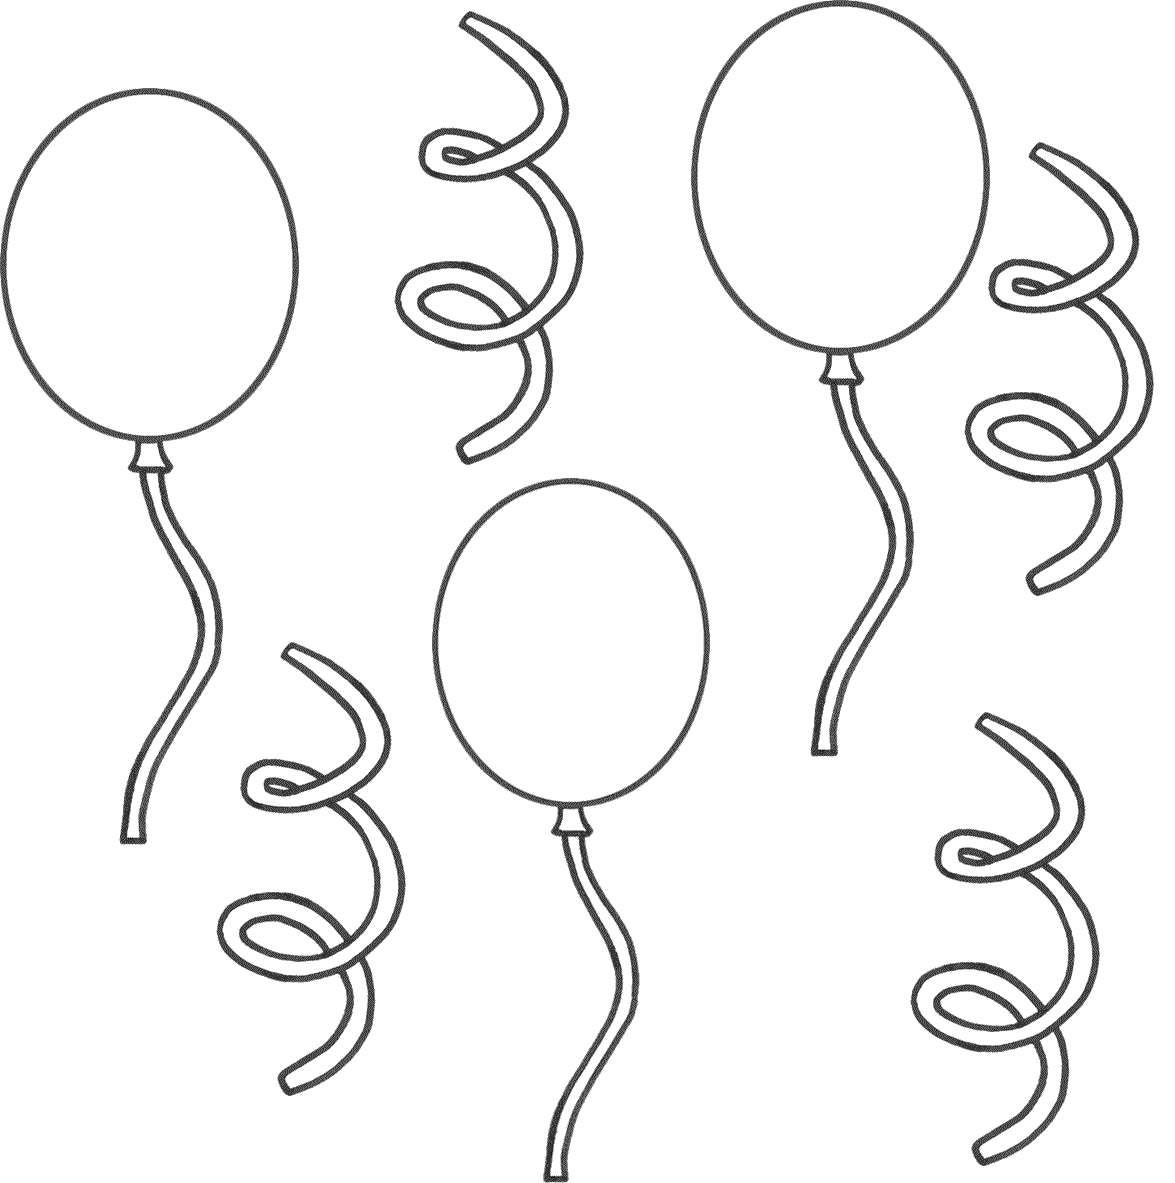 coloring pages of balloons - High Quality Coloring Pages